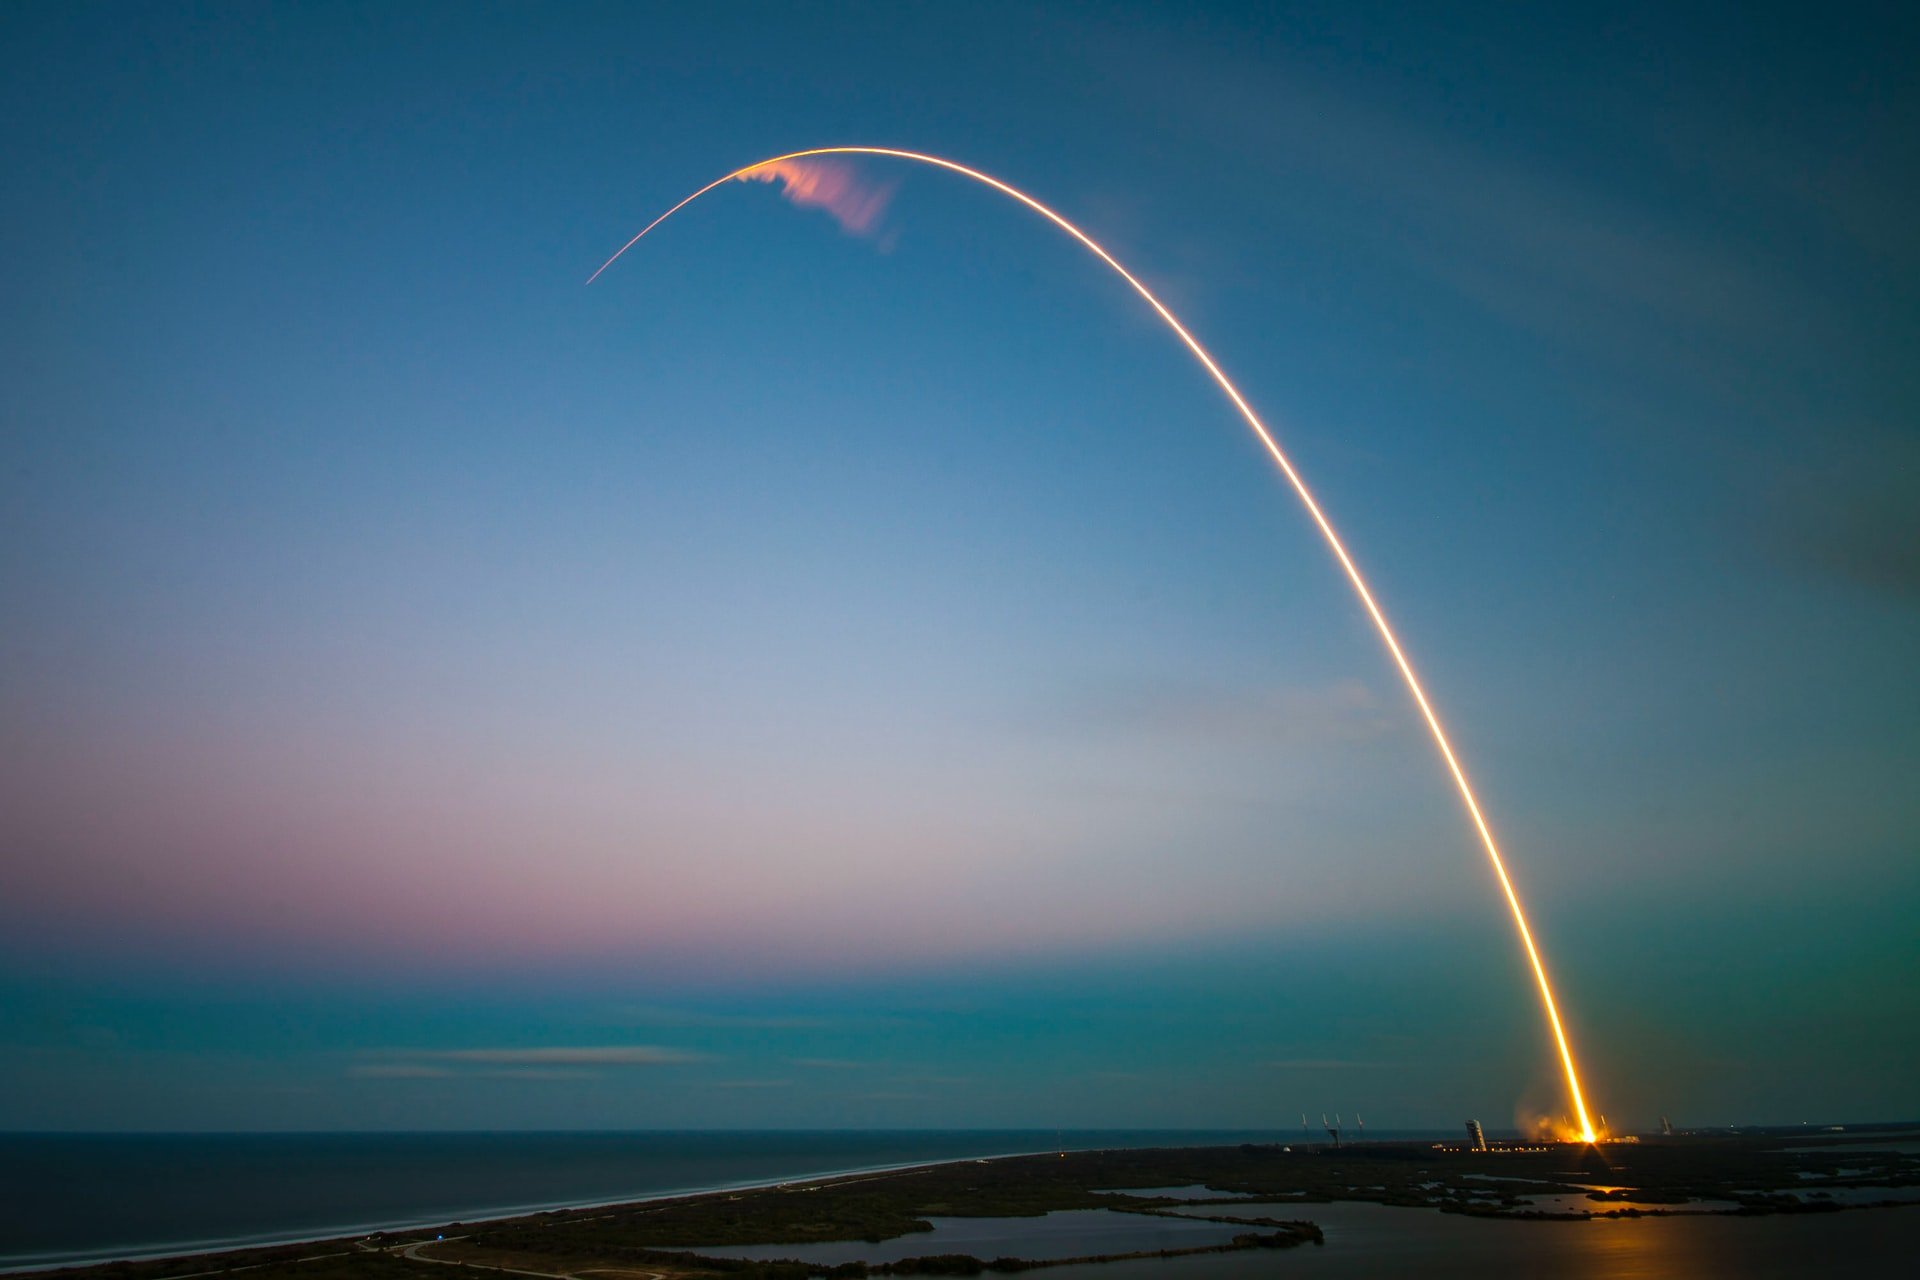 SpaceX launch at Cape Canaveral Air Force Station, United States